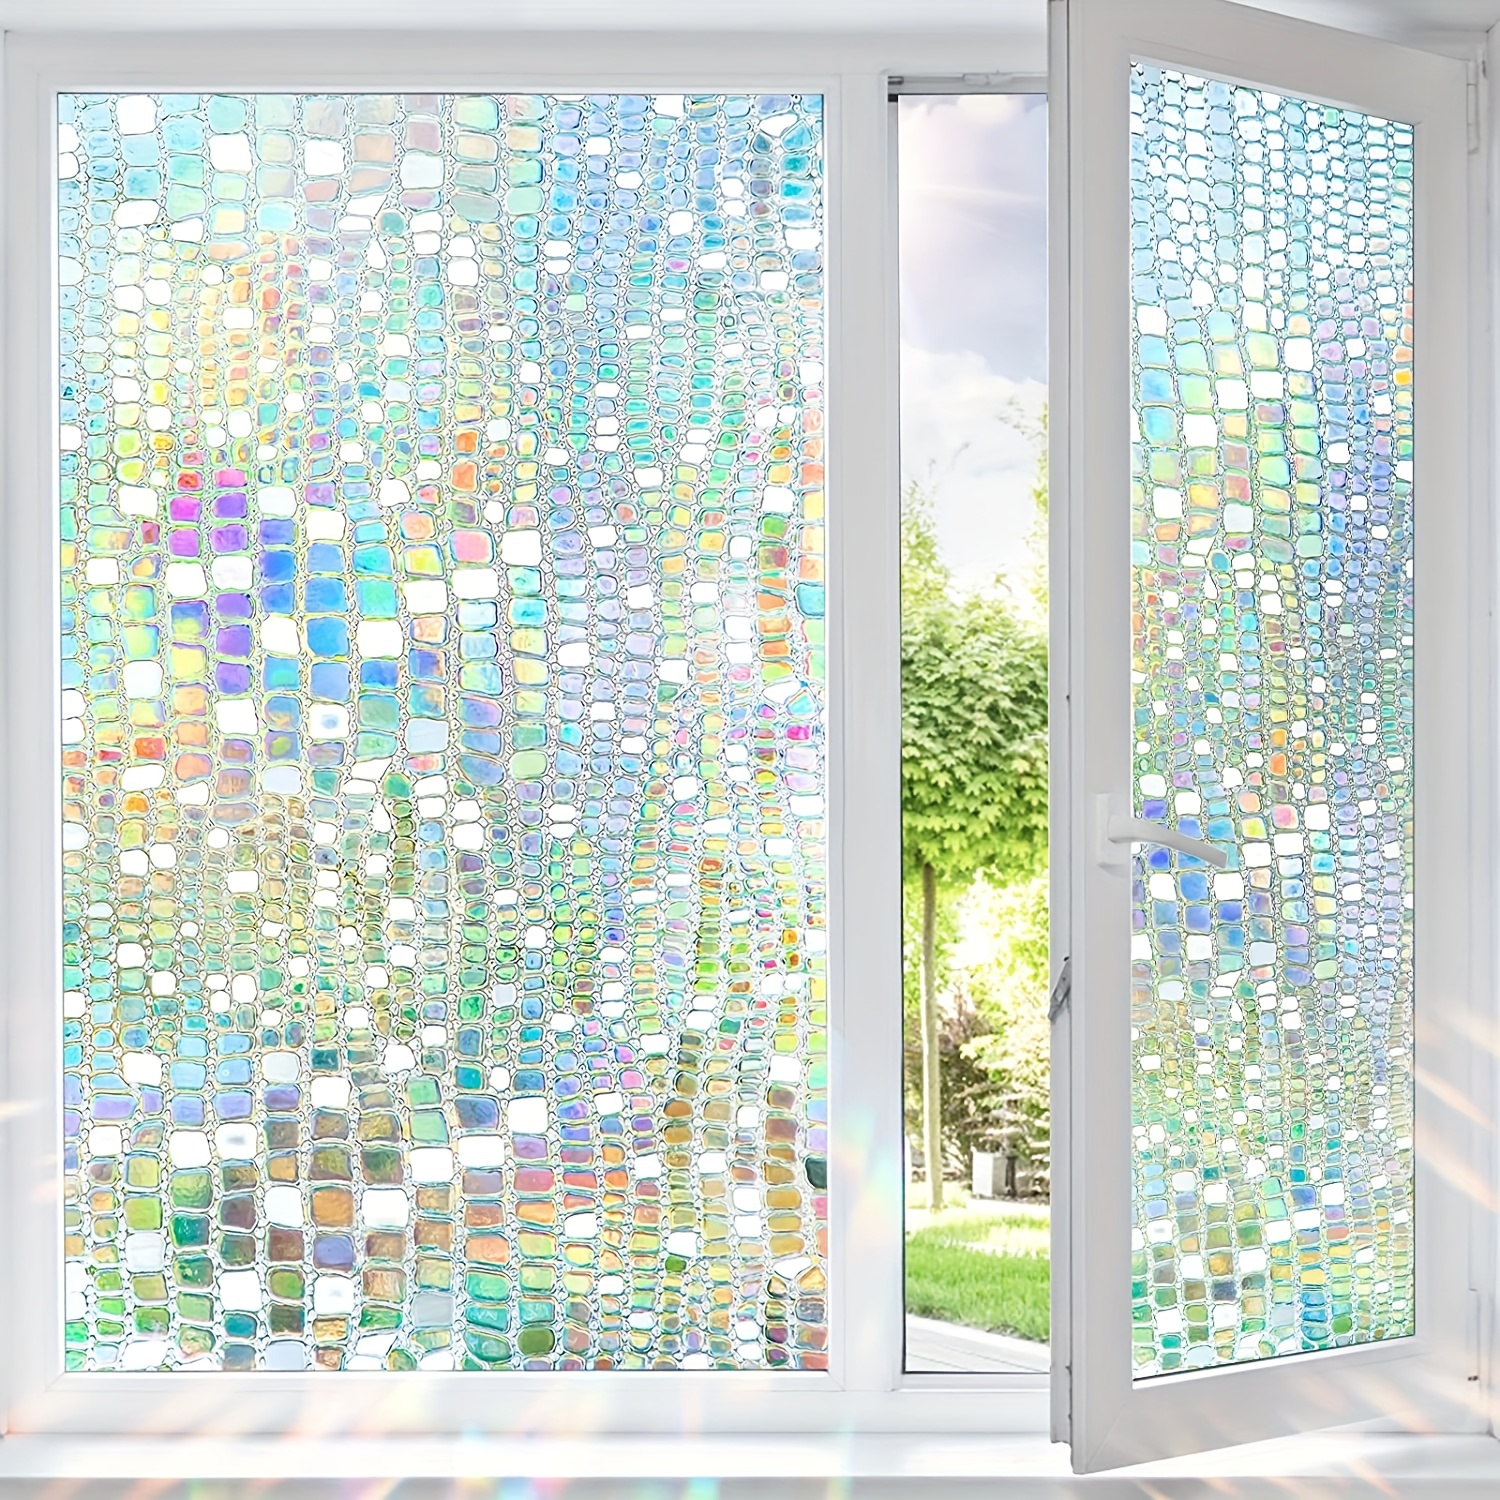 

1pc Privacy Window Film Stained Glass Rainbow Clings Window Tint Sun Blocking 3d Decorative Static Window Sticker For Home Bathroom Living Room Decor